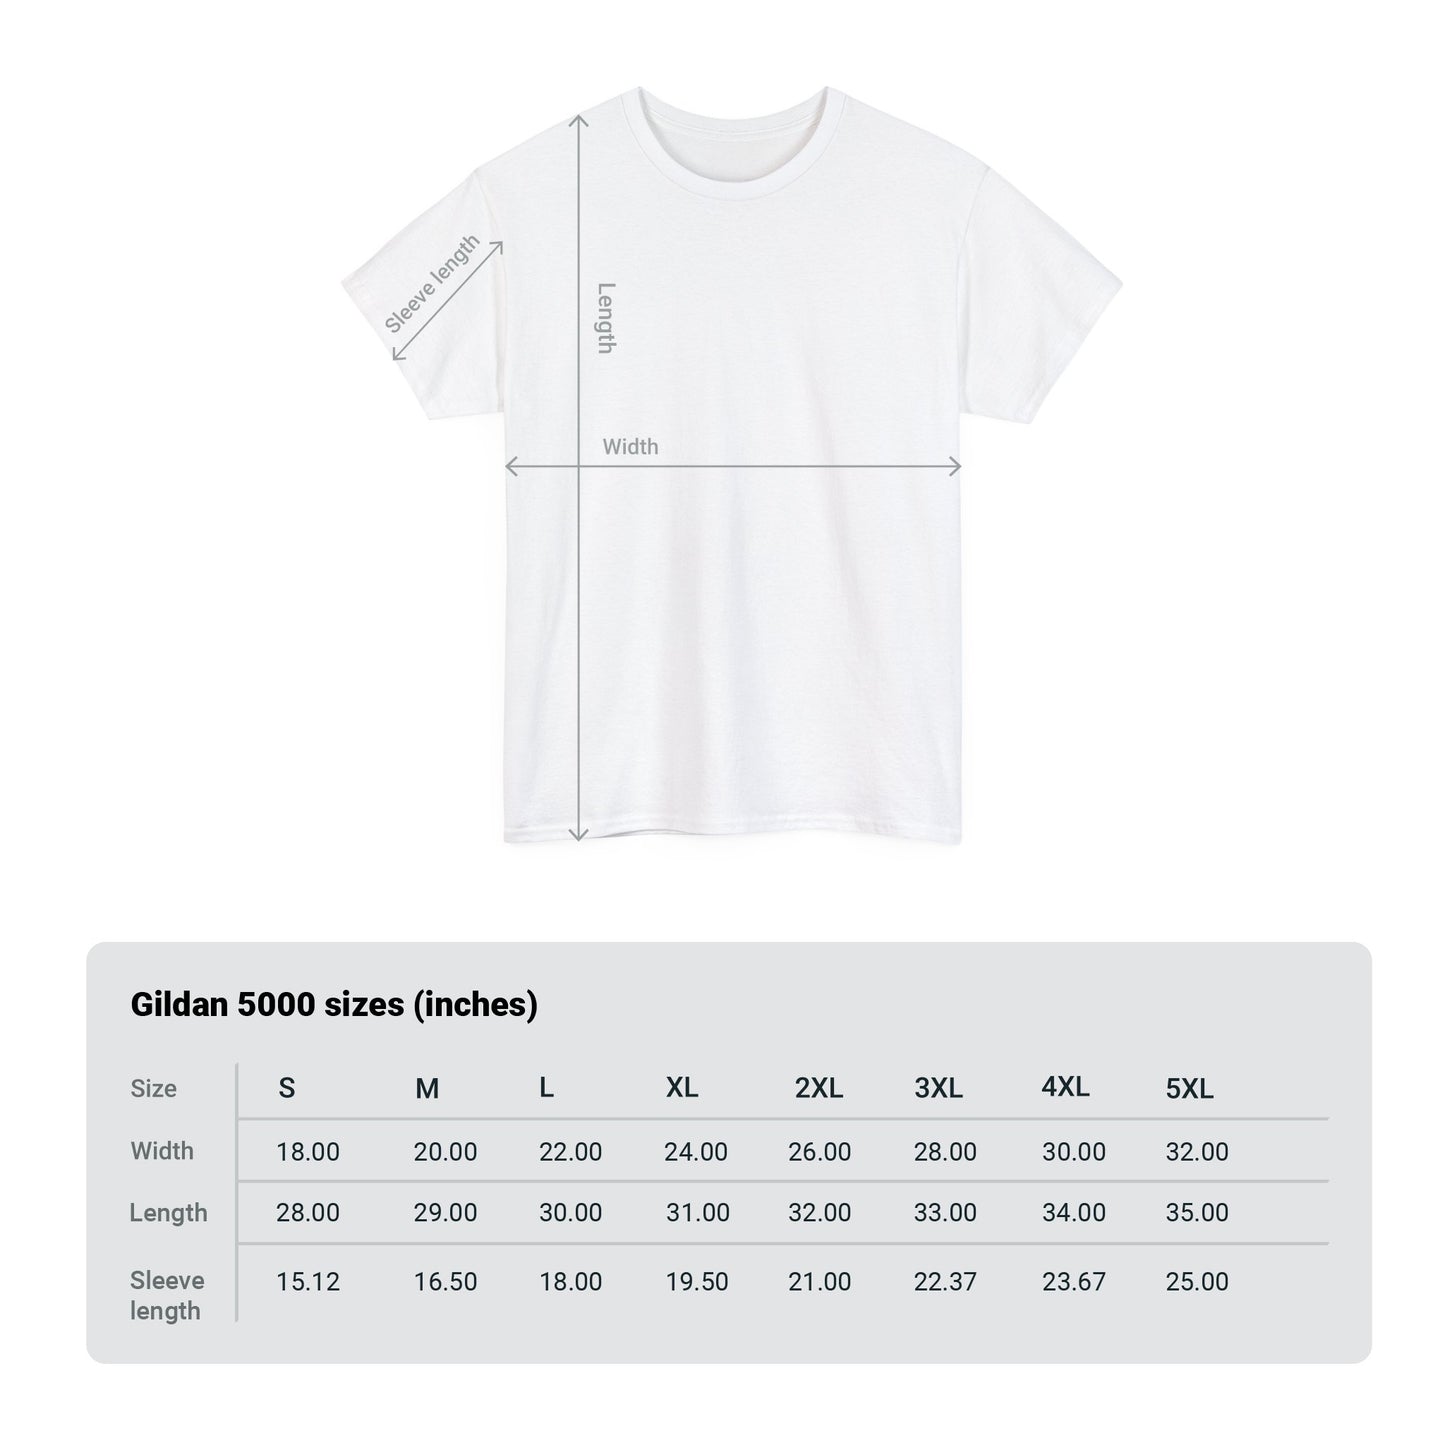 the valley T-SHIRT